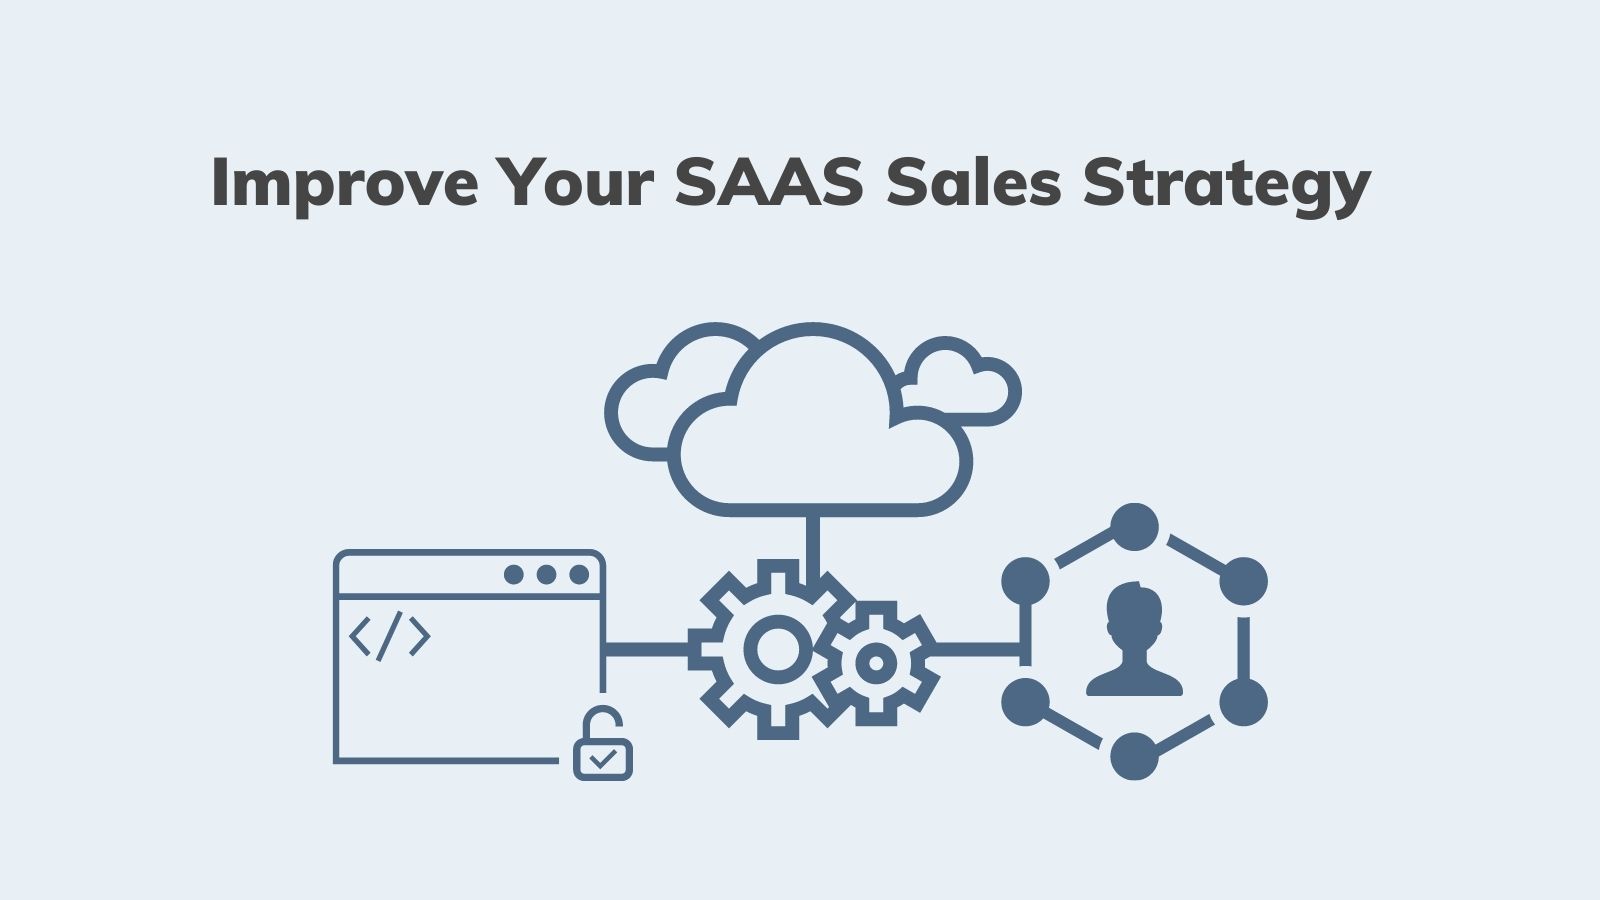 Growing your SAAS product with sales strategy